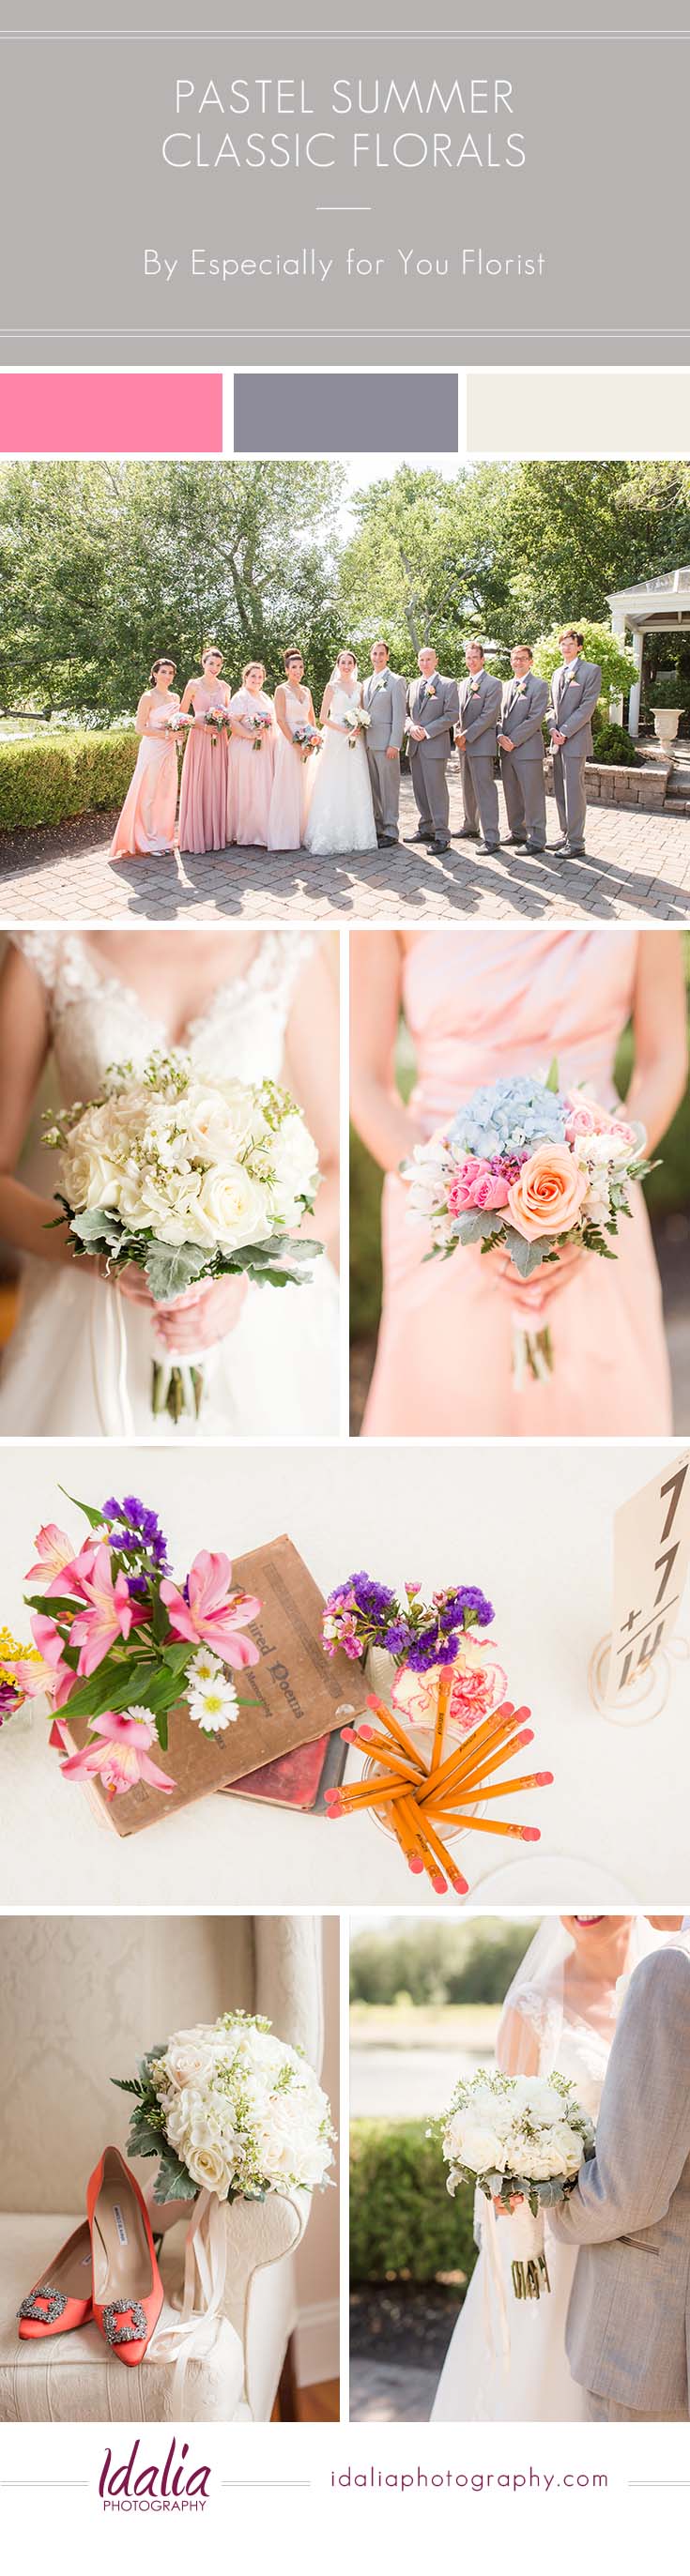 Pastel summer florals by Especially for You Florist | Photos by Idalia Photography